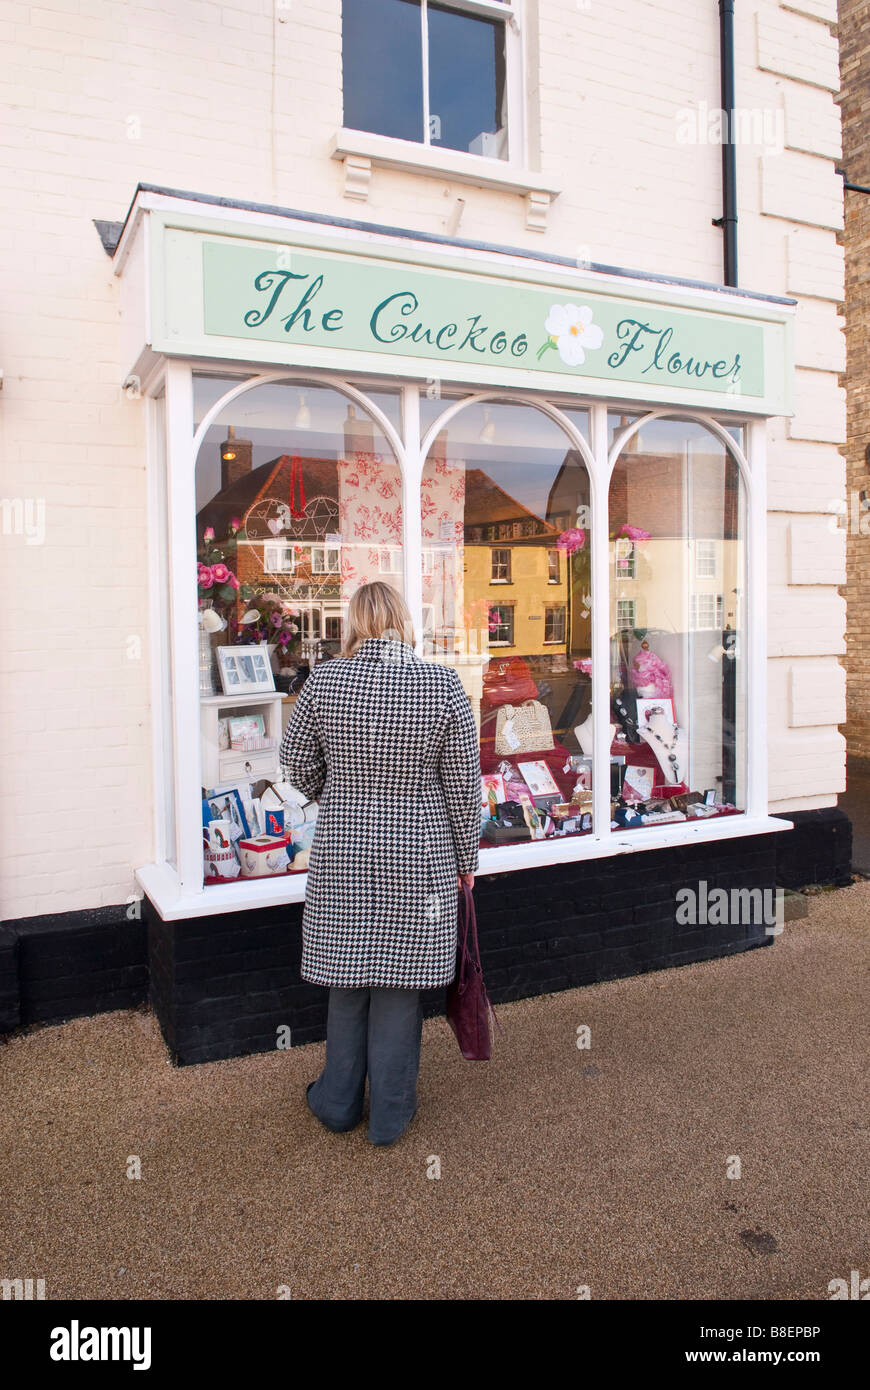 The Cuckoo Flower shop store selling gifts etc. in Long Melford,Suffolk,Uk Stock Photo